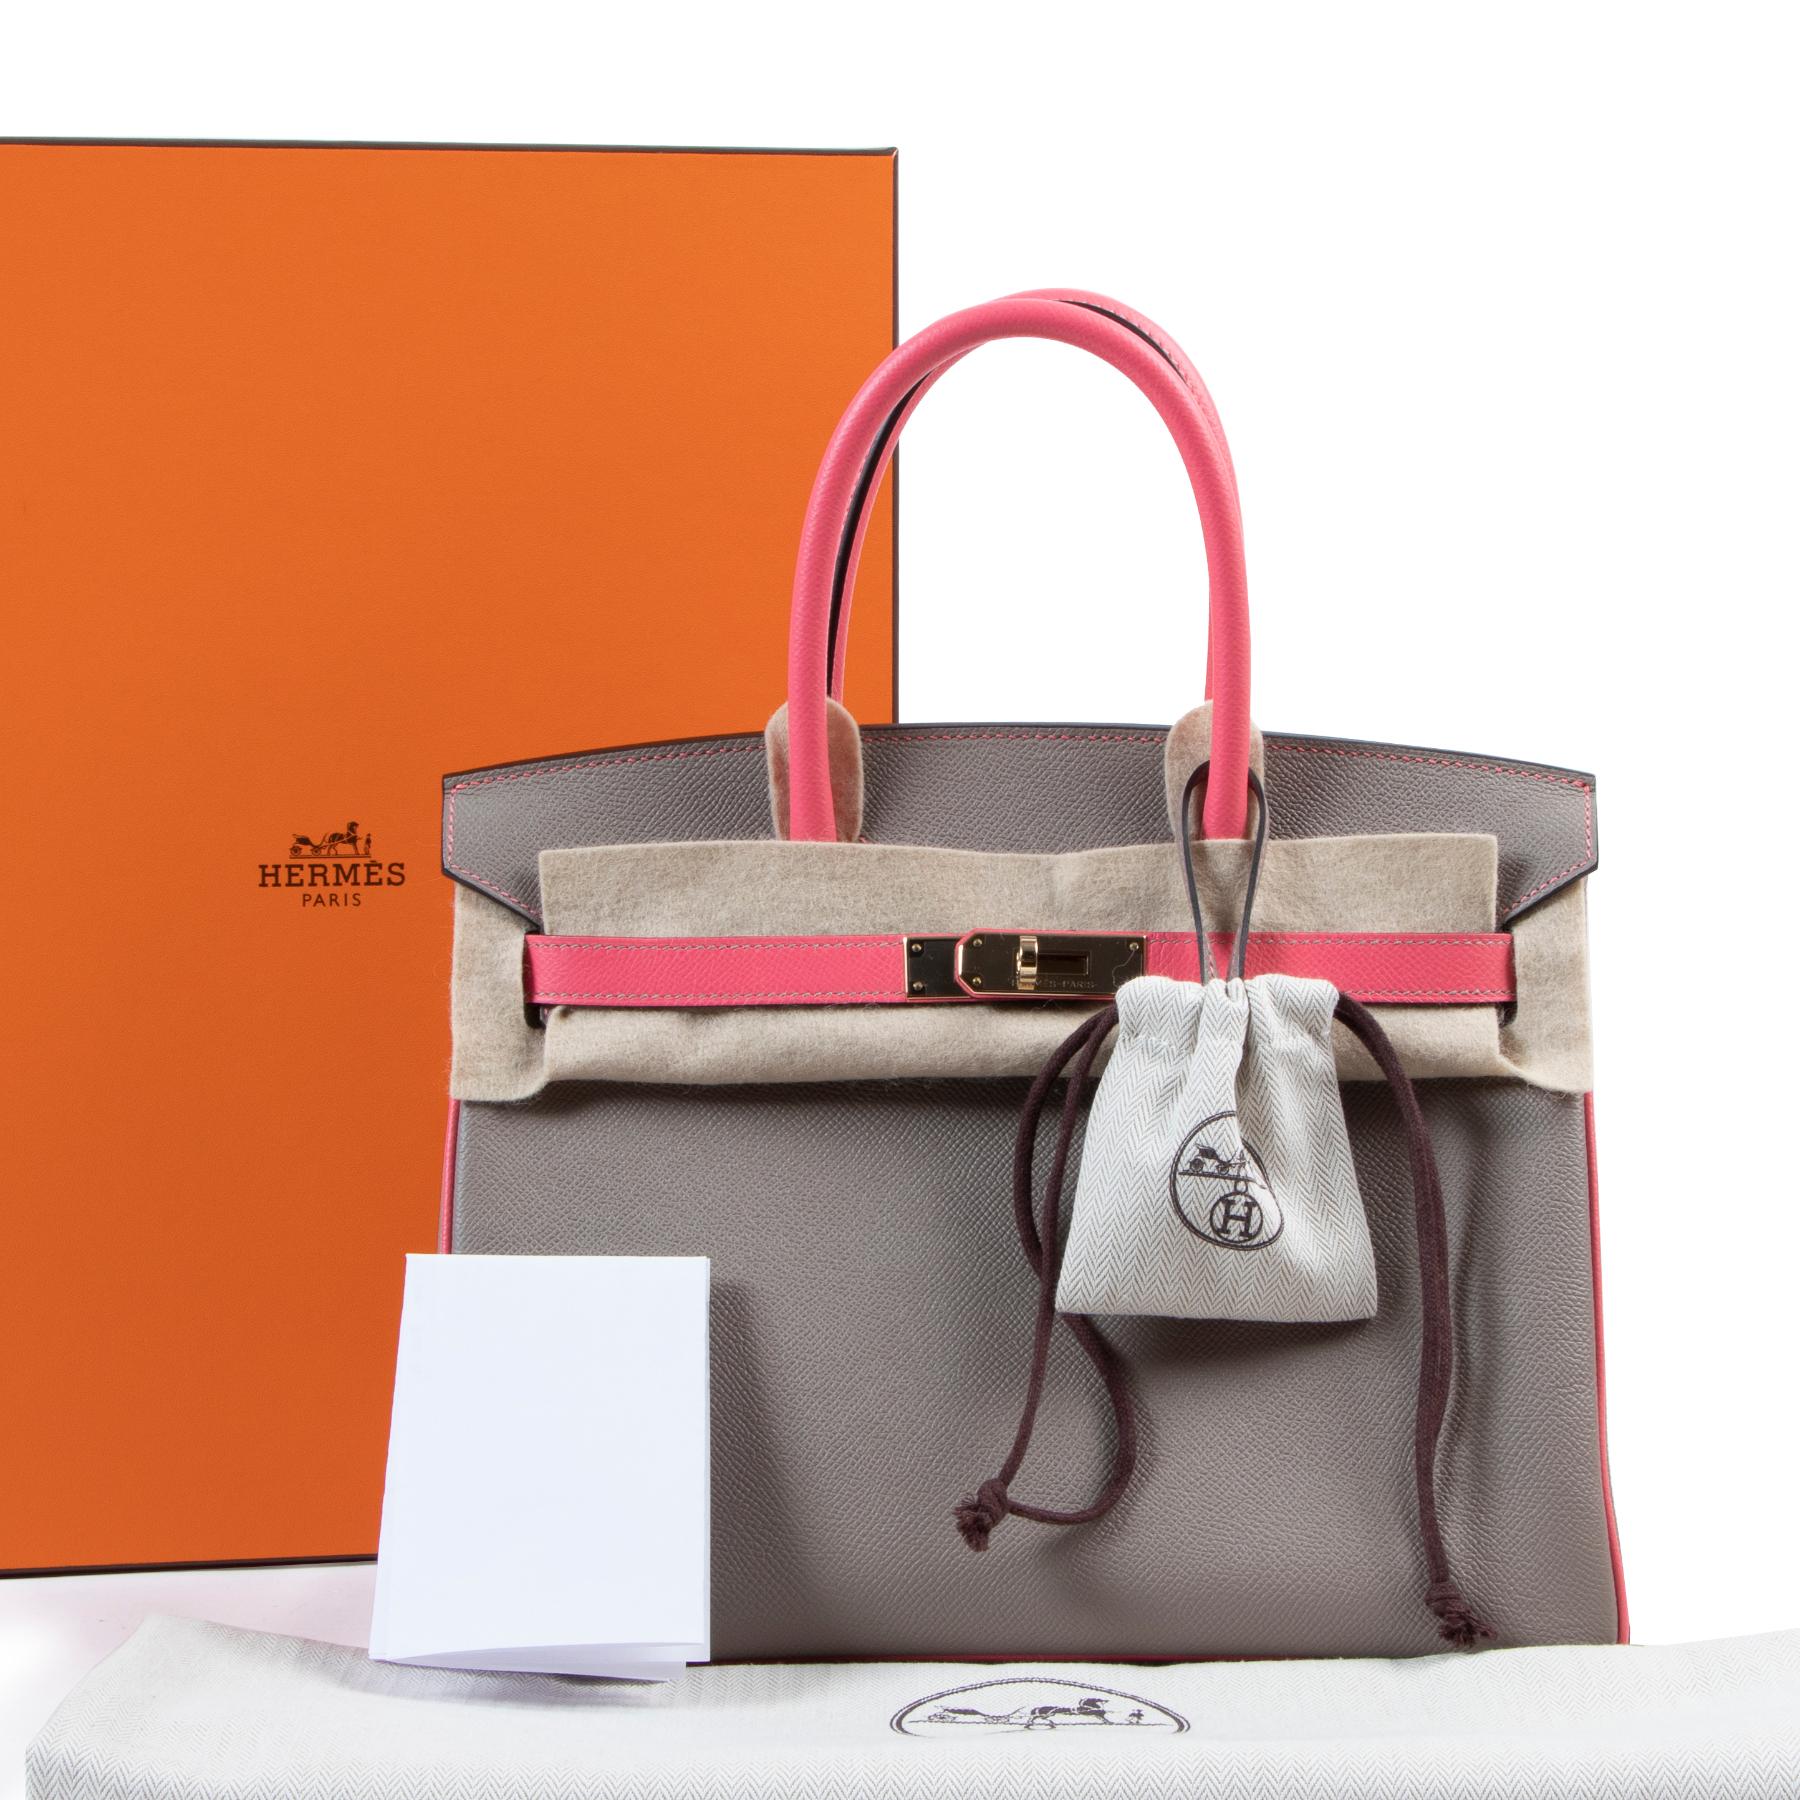 Hermes HSS horseshoe special order birkin 30cm bi color with gris asphalt and rose azalee. Rose azalee is a stunning saturated pink color, one of the most exclusive Hermès colors. The combination with the smooth gris asphalt makes this bag a one of